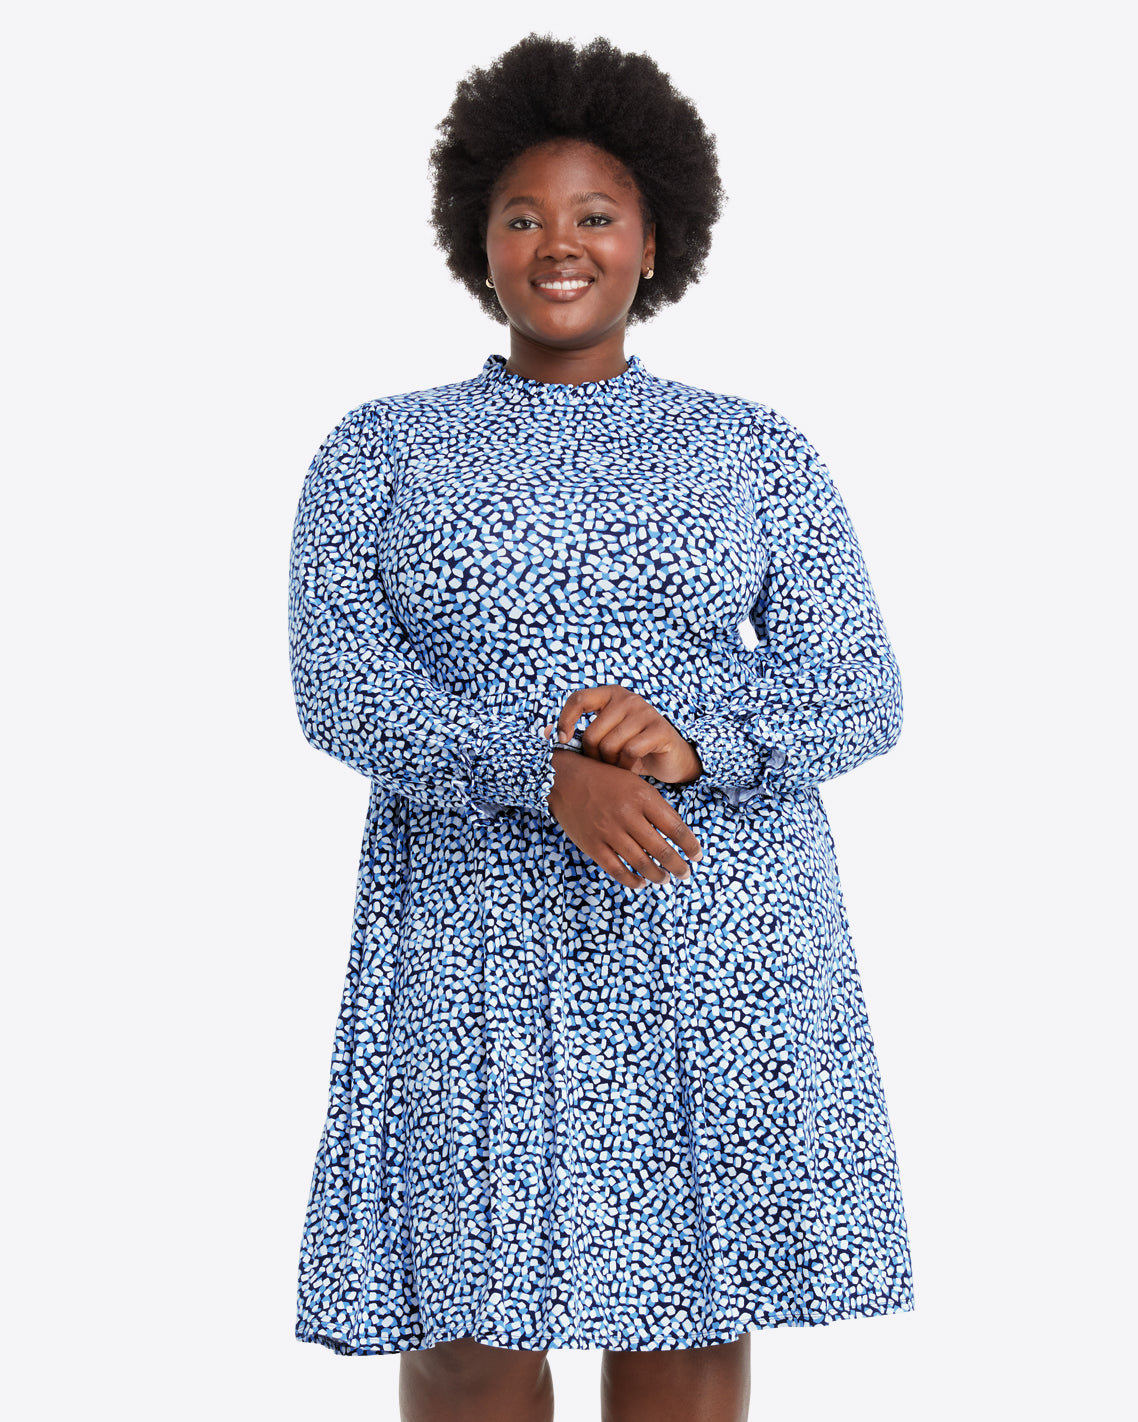 Kitty Dress in Blue Square Dot